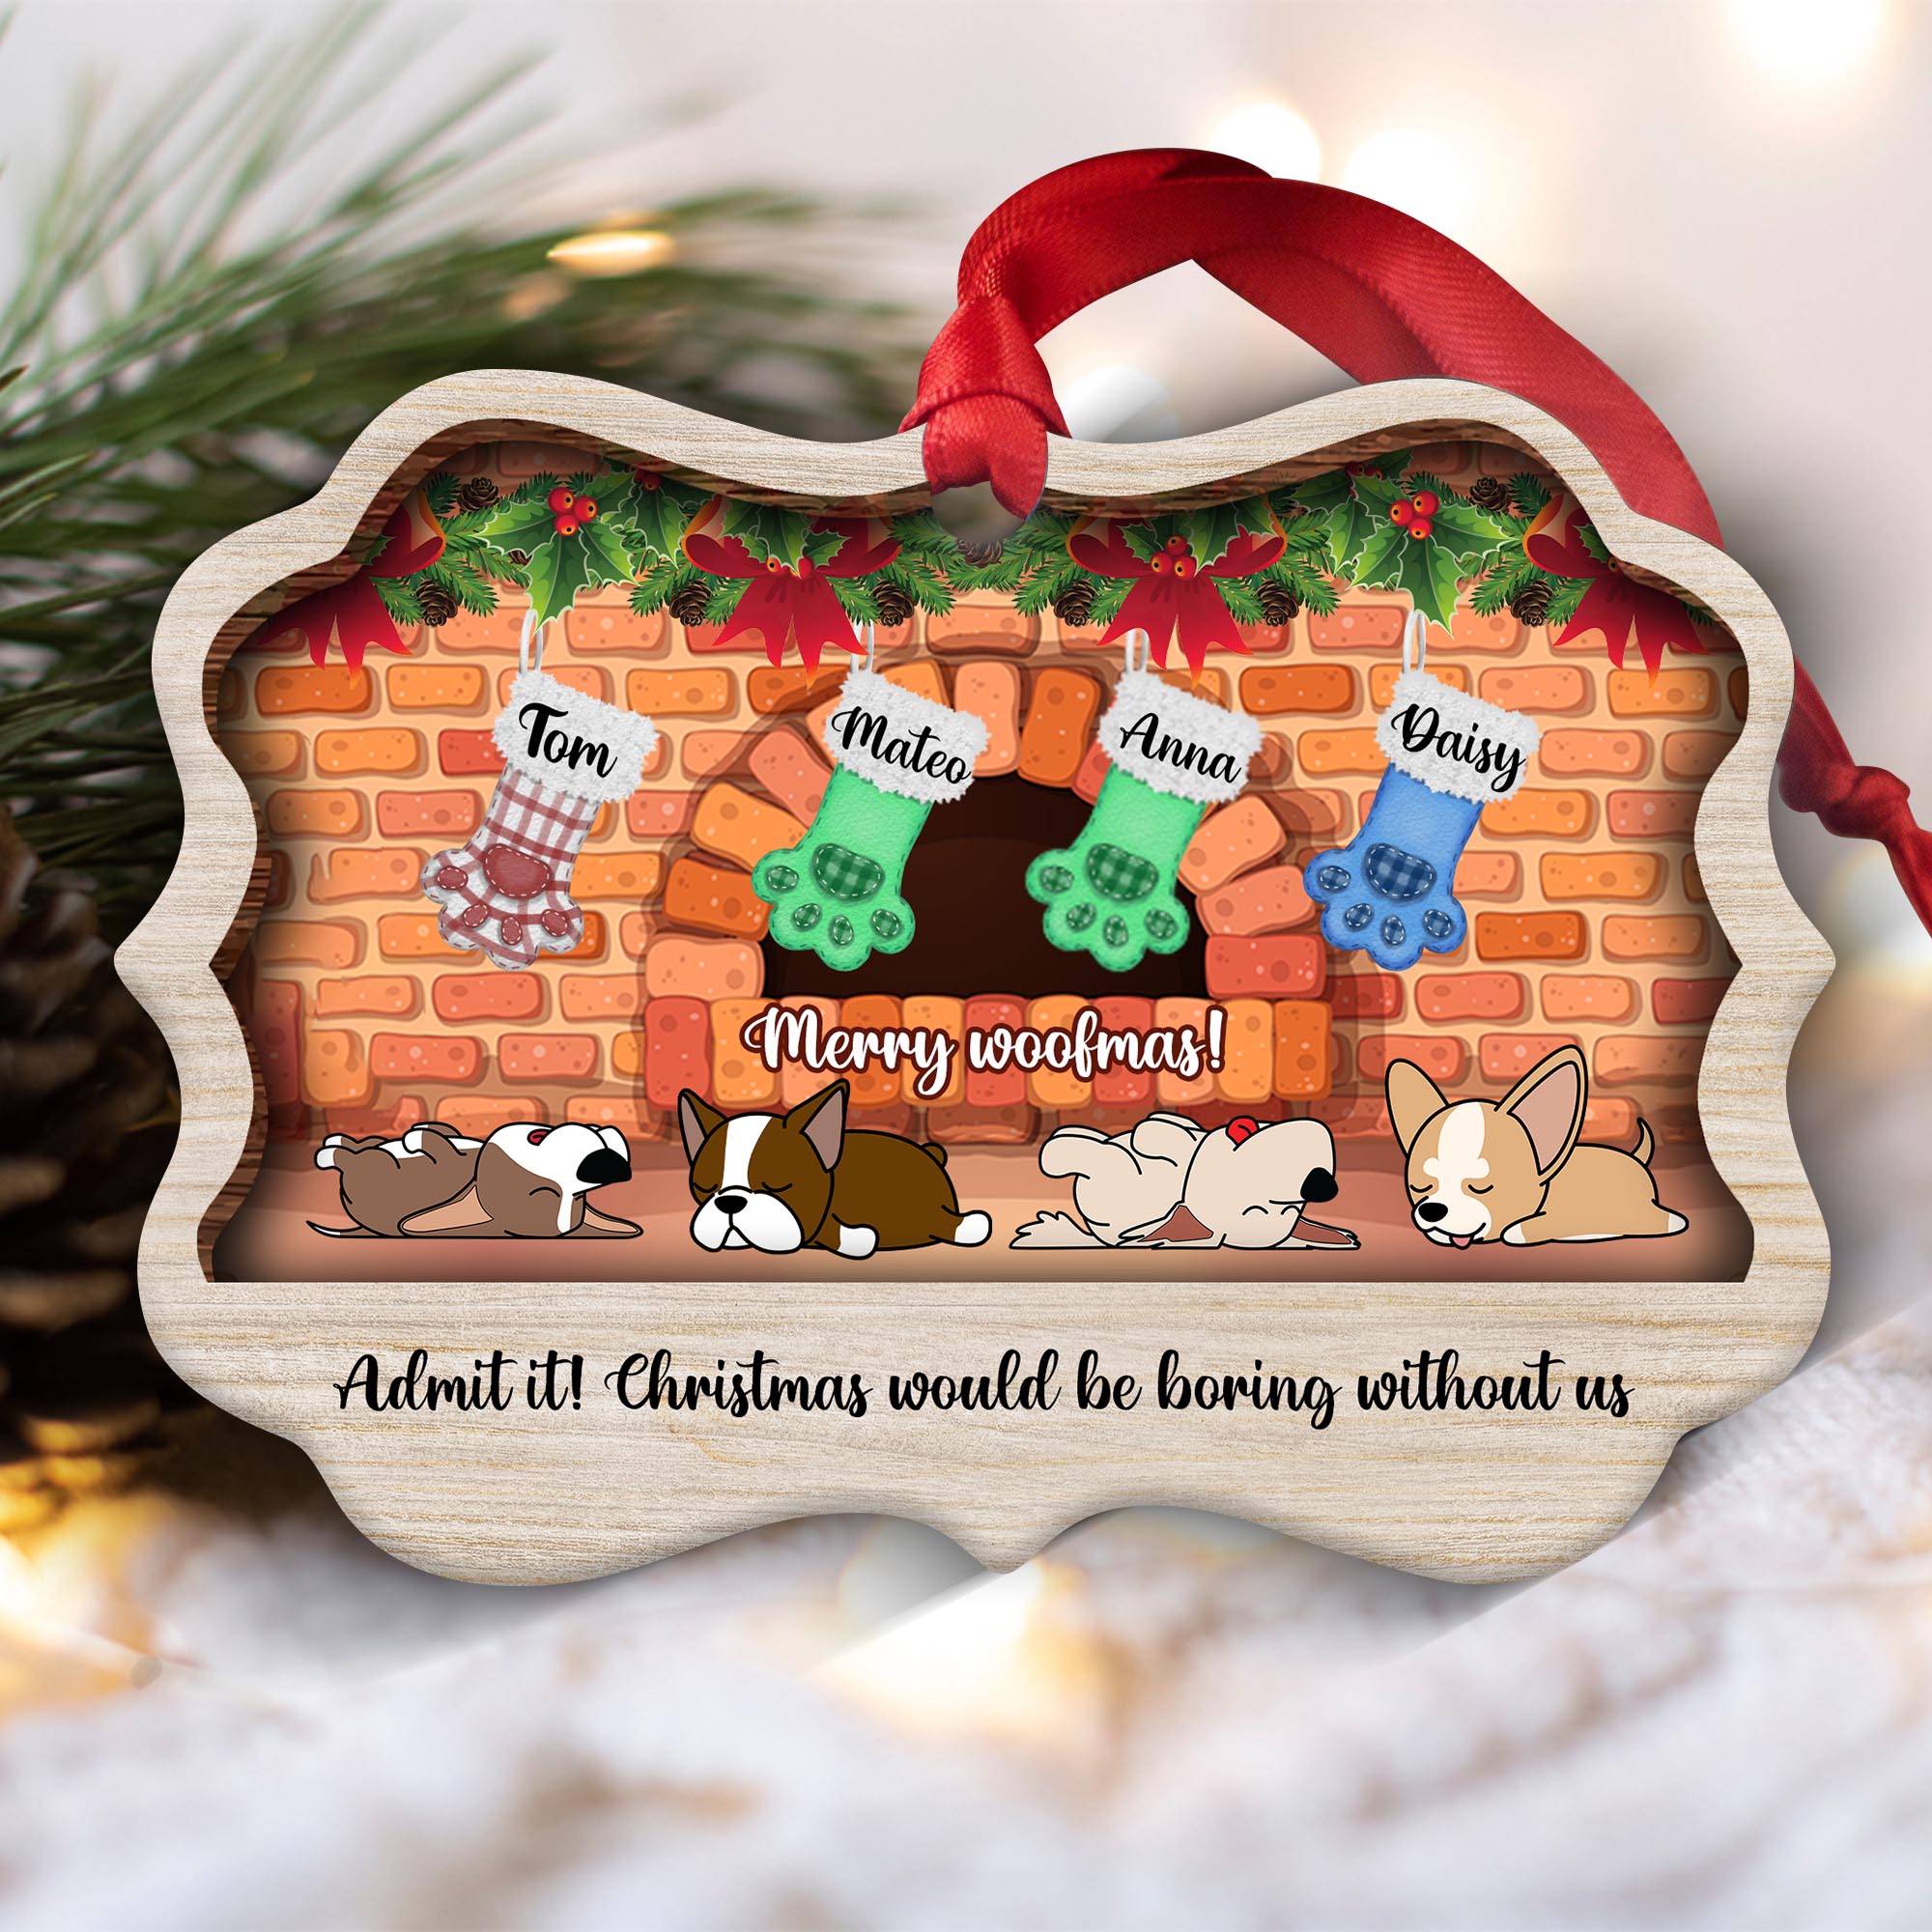 Admit it! Christmas Would Be Boring Without Me Stocking Ornament - Personalized Aluminum Ornament